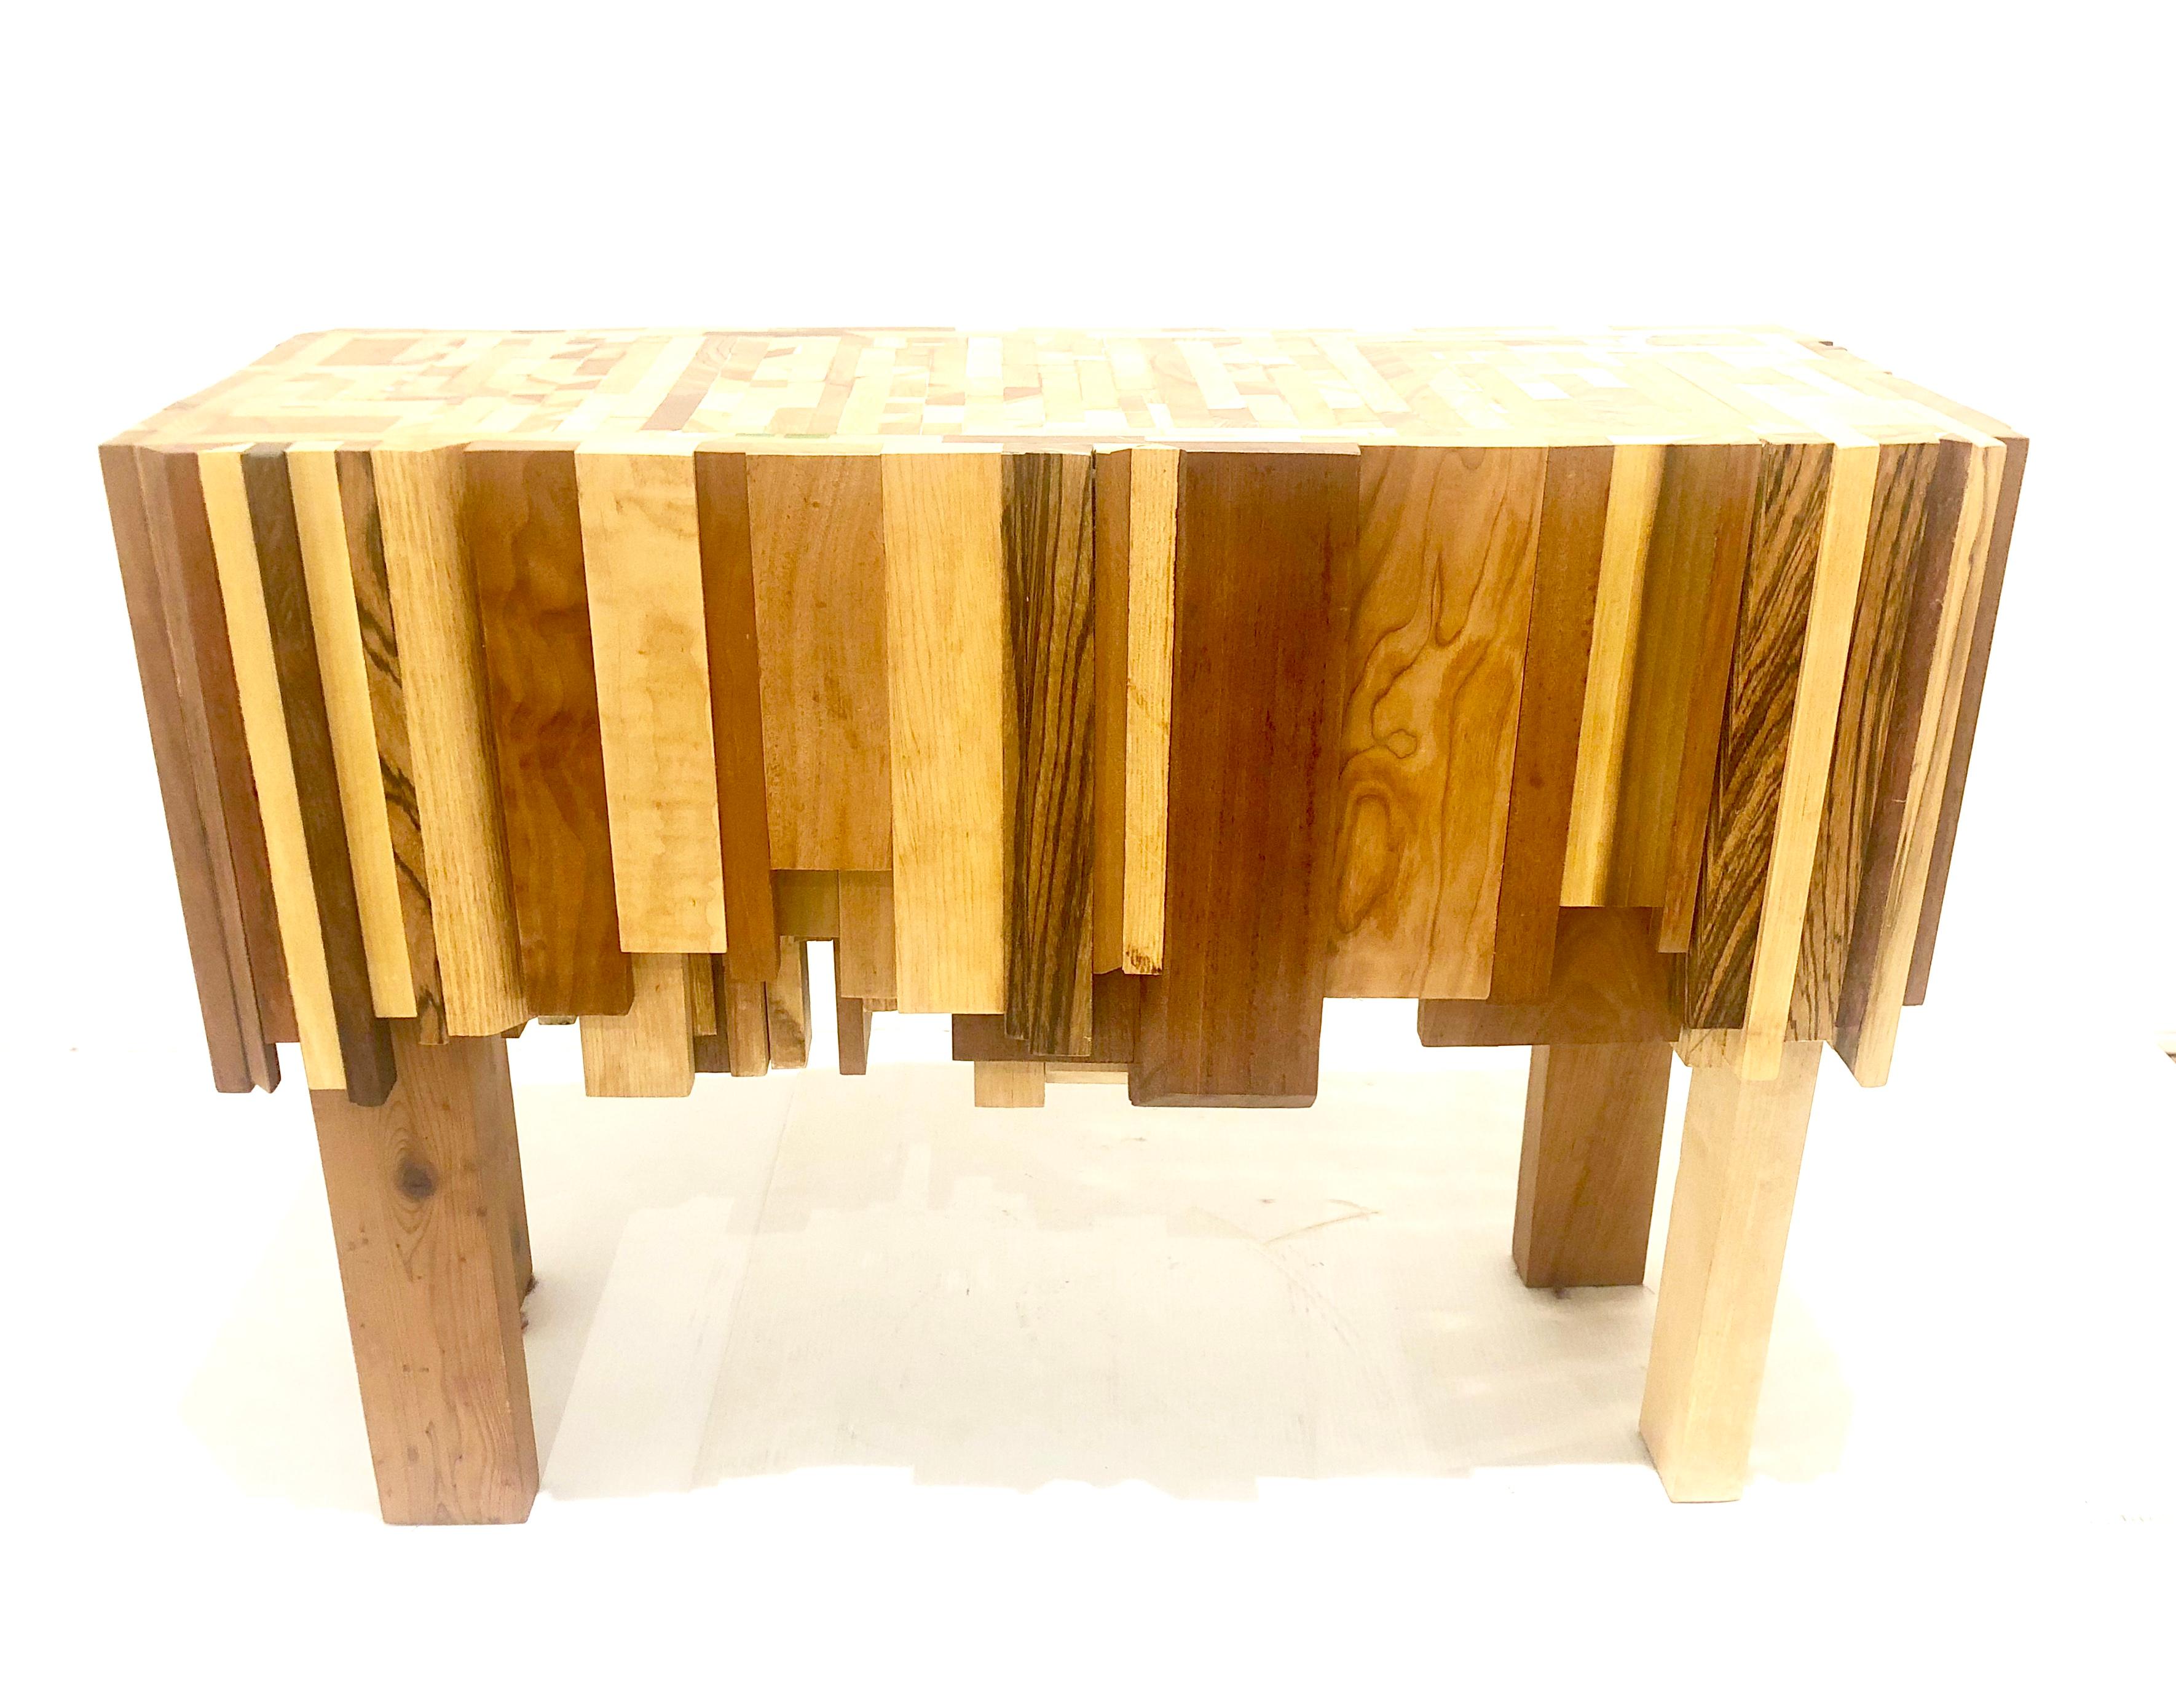 Artful table designed and built by artist Ben Darby. The table is made of multiple types of hard wood joined (solid core) to create a mosaic. Darby puts his artist stamp by integrating acrylic paint in various colors on the top surface. The bottom